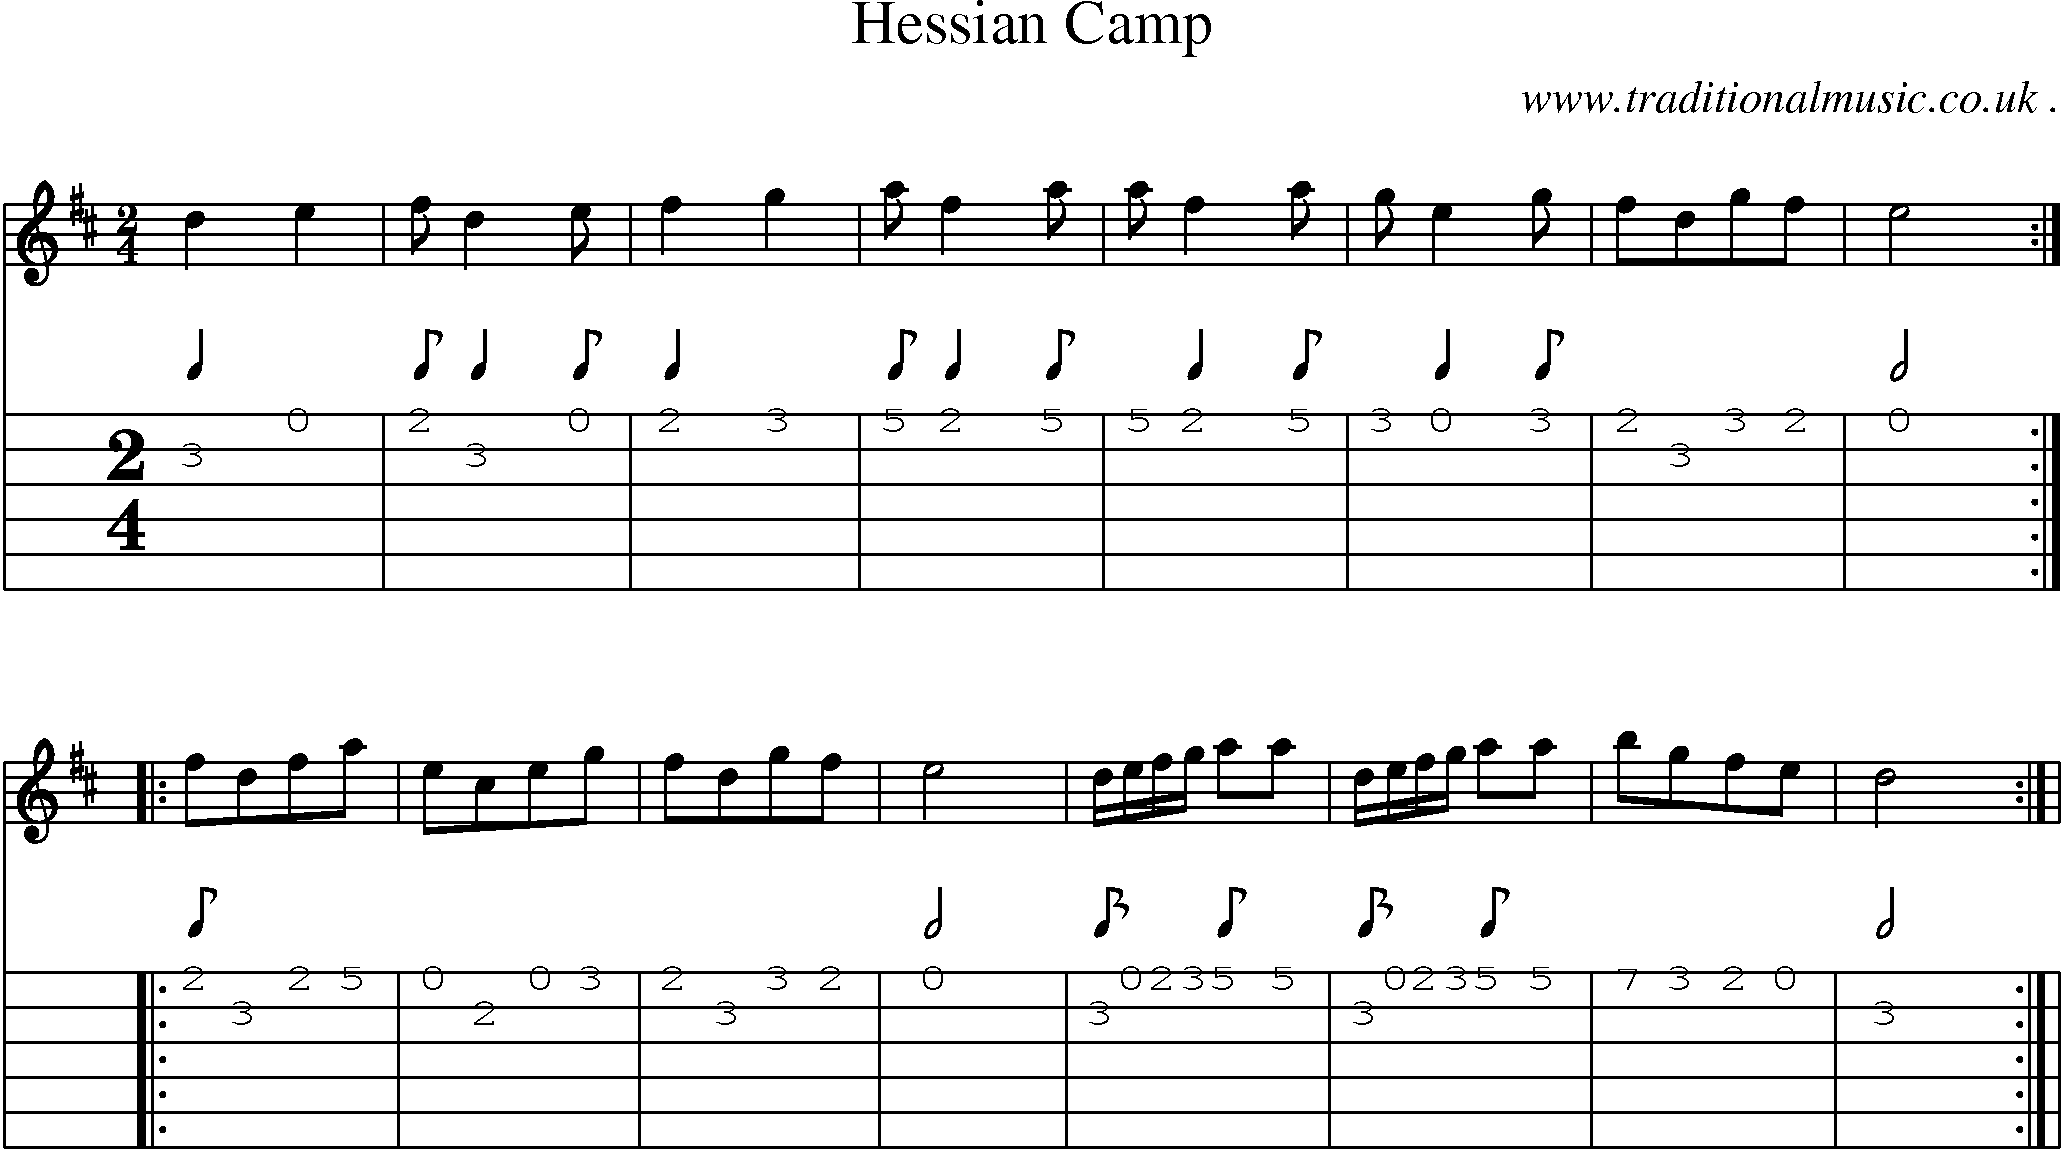 Sheet-Music and Guitar Tabs for Hessian Camp